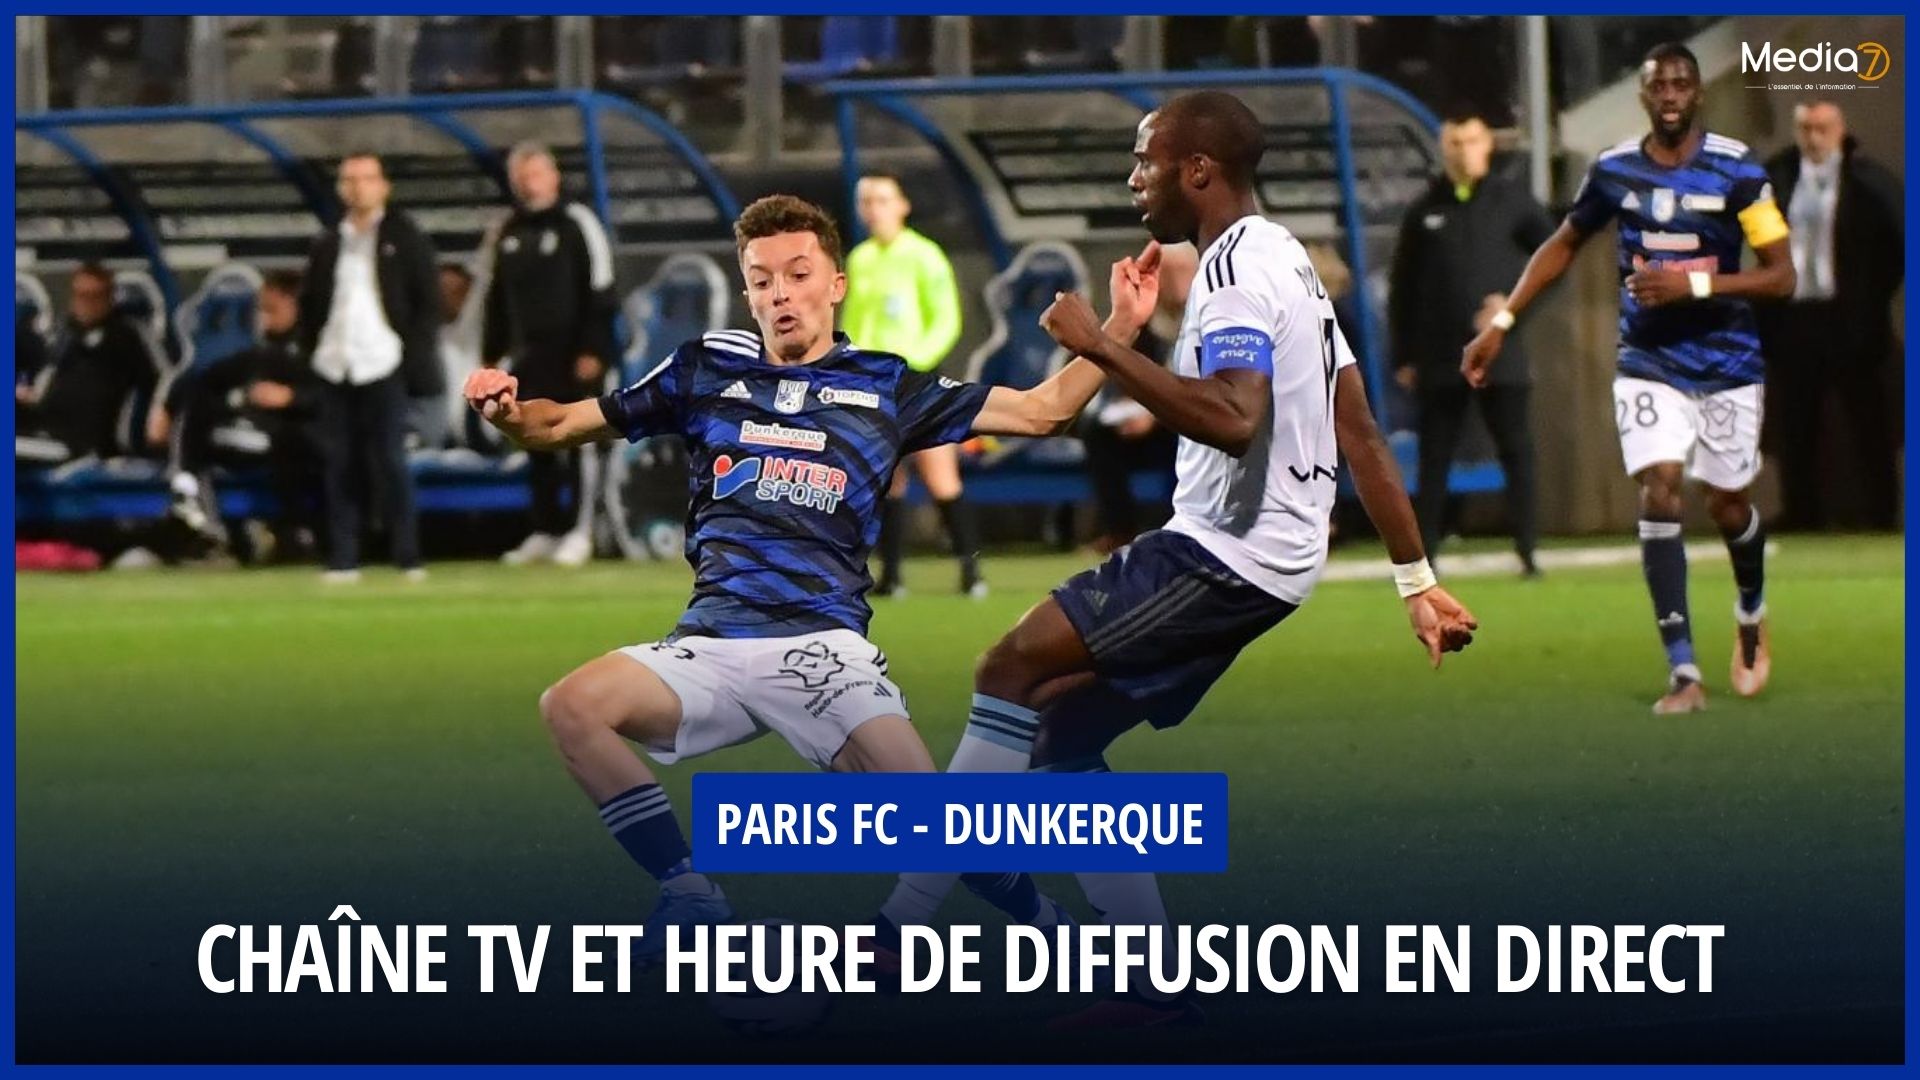 Match Paris FC - Dunkirk Live: TV Channel and Broadcast Schedule - Media7